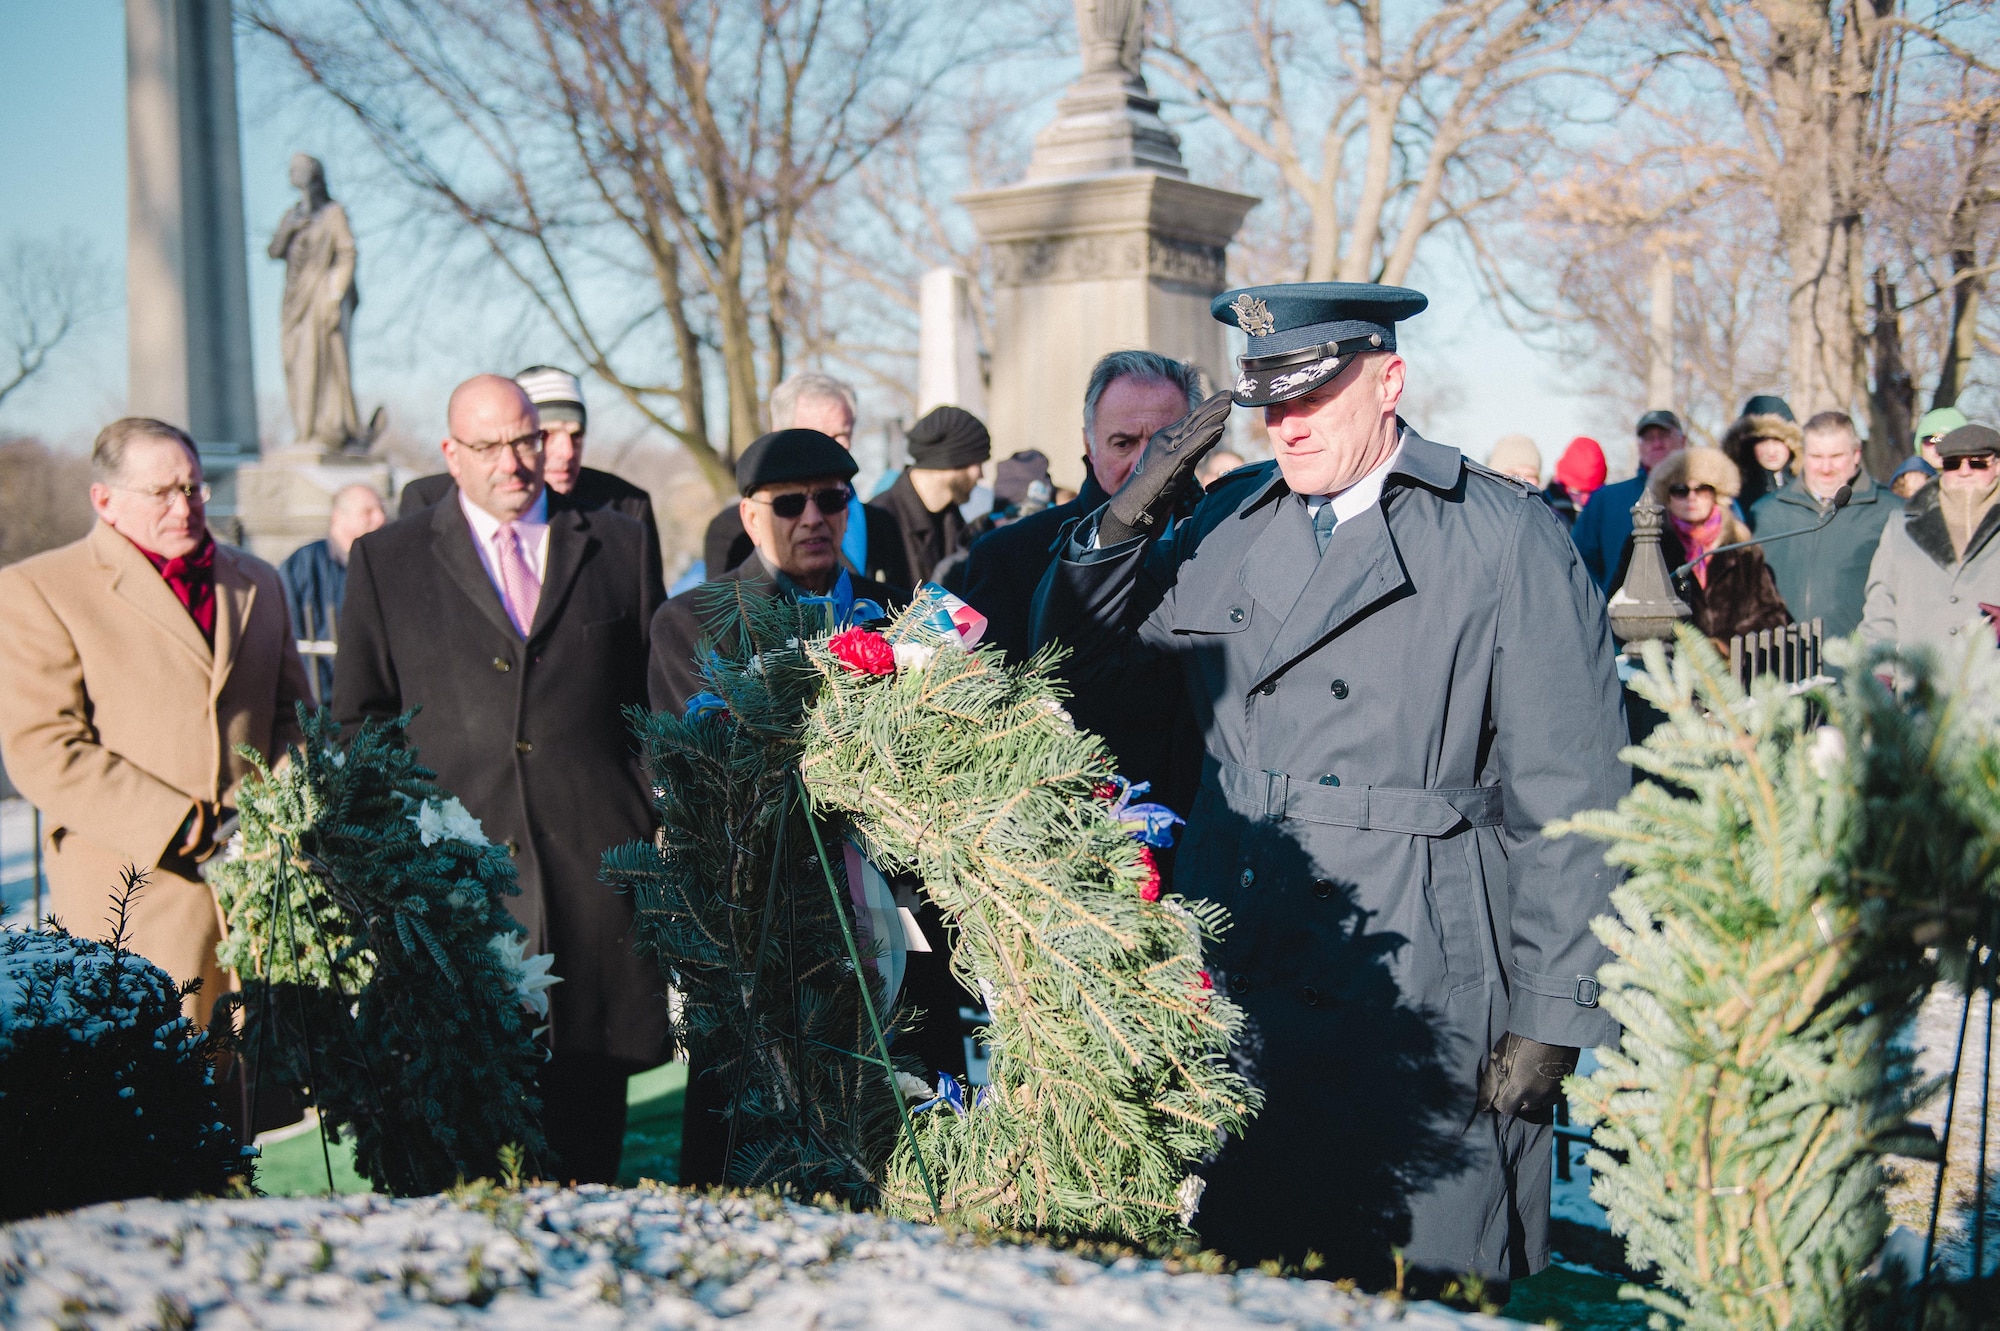 Col. Gary R. Charlton, vice commander of the 107th Airlift Wing, Niagara Falls Air Reserve Station, presents a wreath at the grave of President Millard Fillmore, on behalf of President Barack Obama, Forest Lawn Cemetery, Buffalo, N.Y., Jan. 6, 2017. The ceremony, which is held by the University at Buffalo, a school which Fillmore was one of the founders, commemorates the former president's birthday. (U.S. Air Force Photo by Staff Sgt. Ryan Campbell)